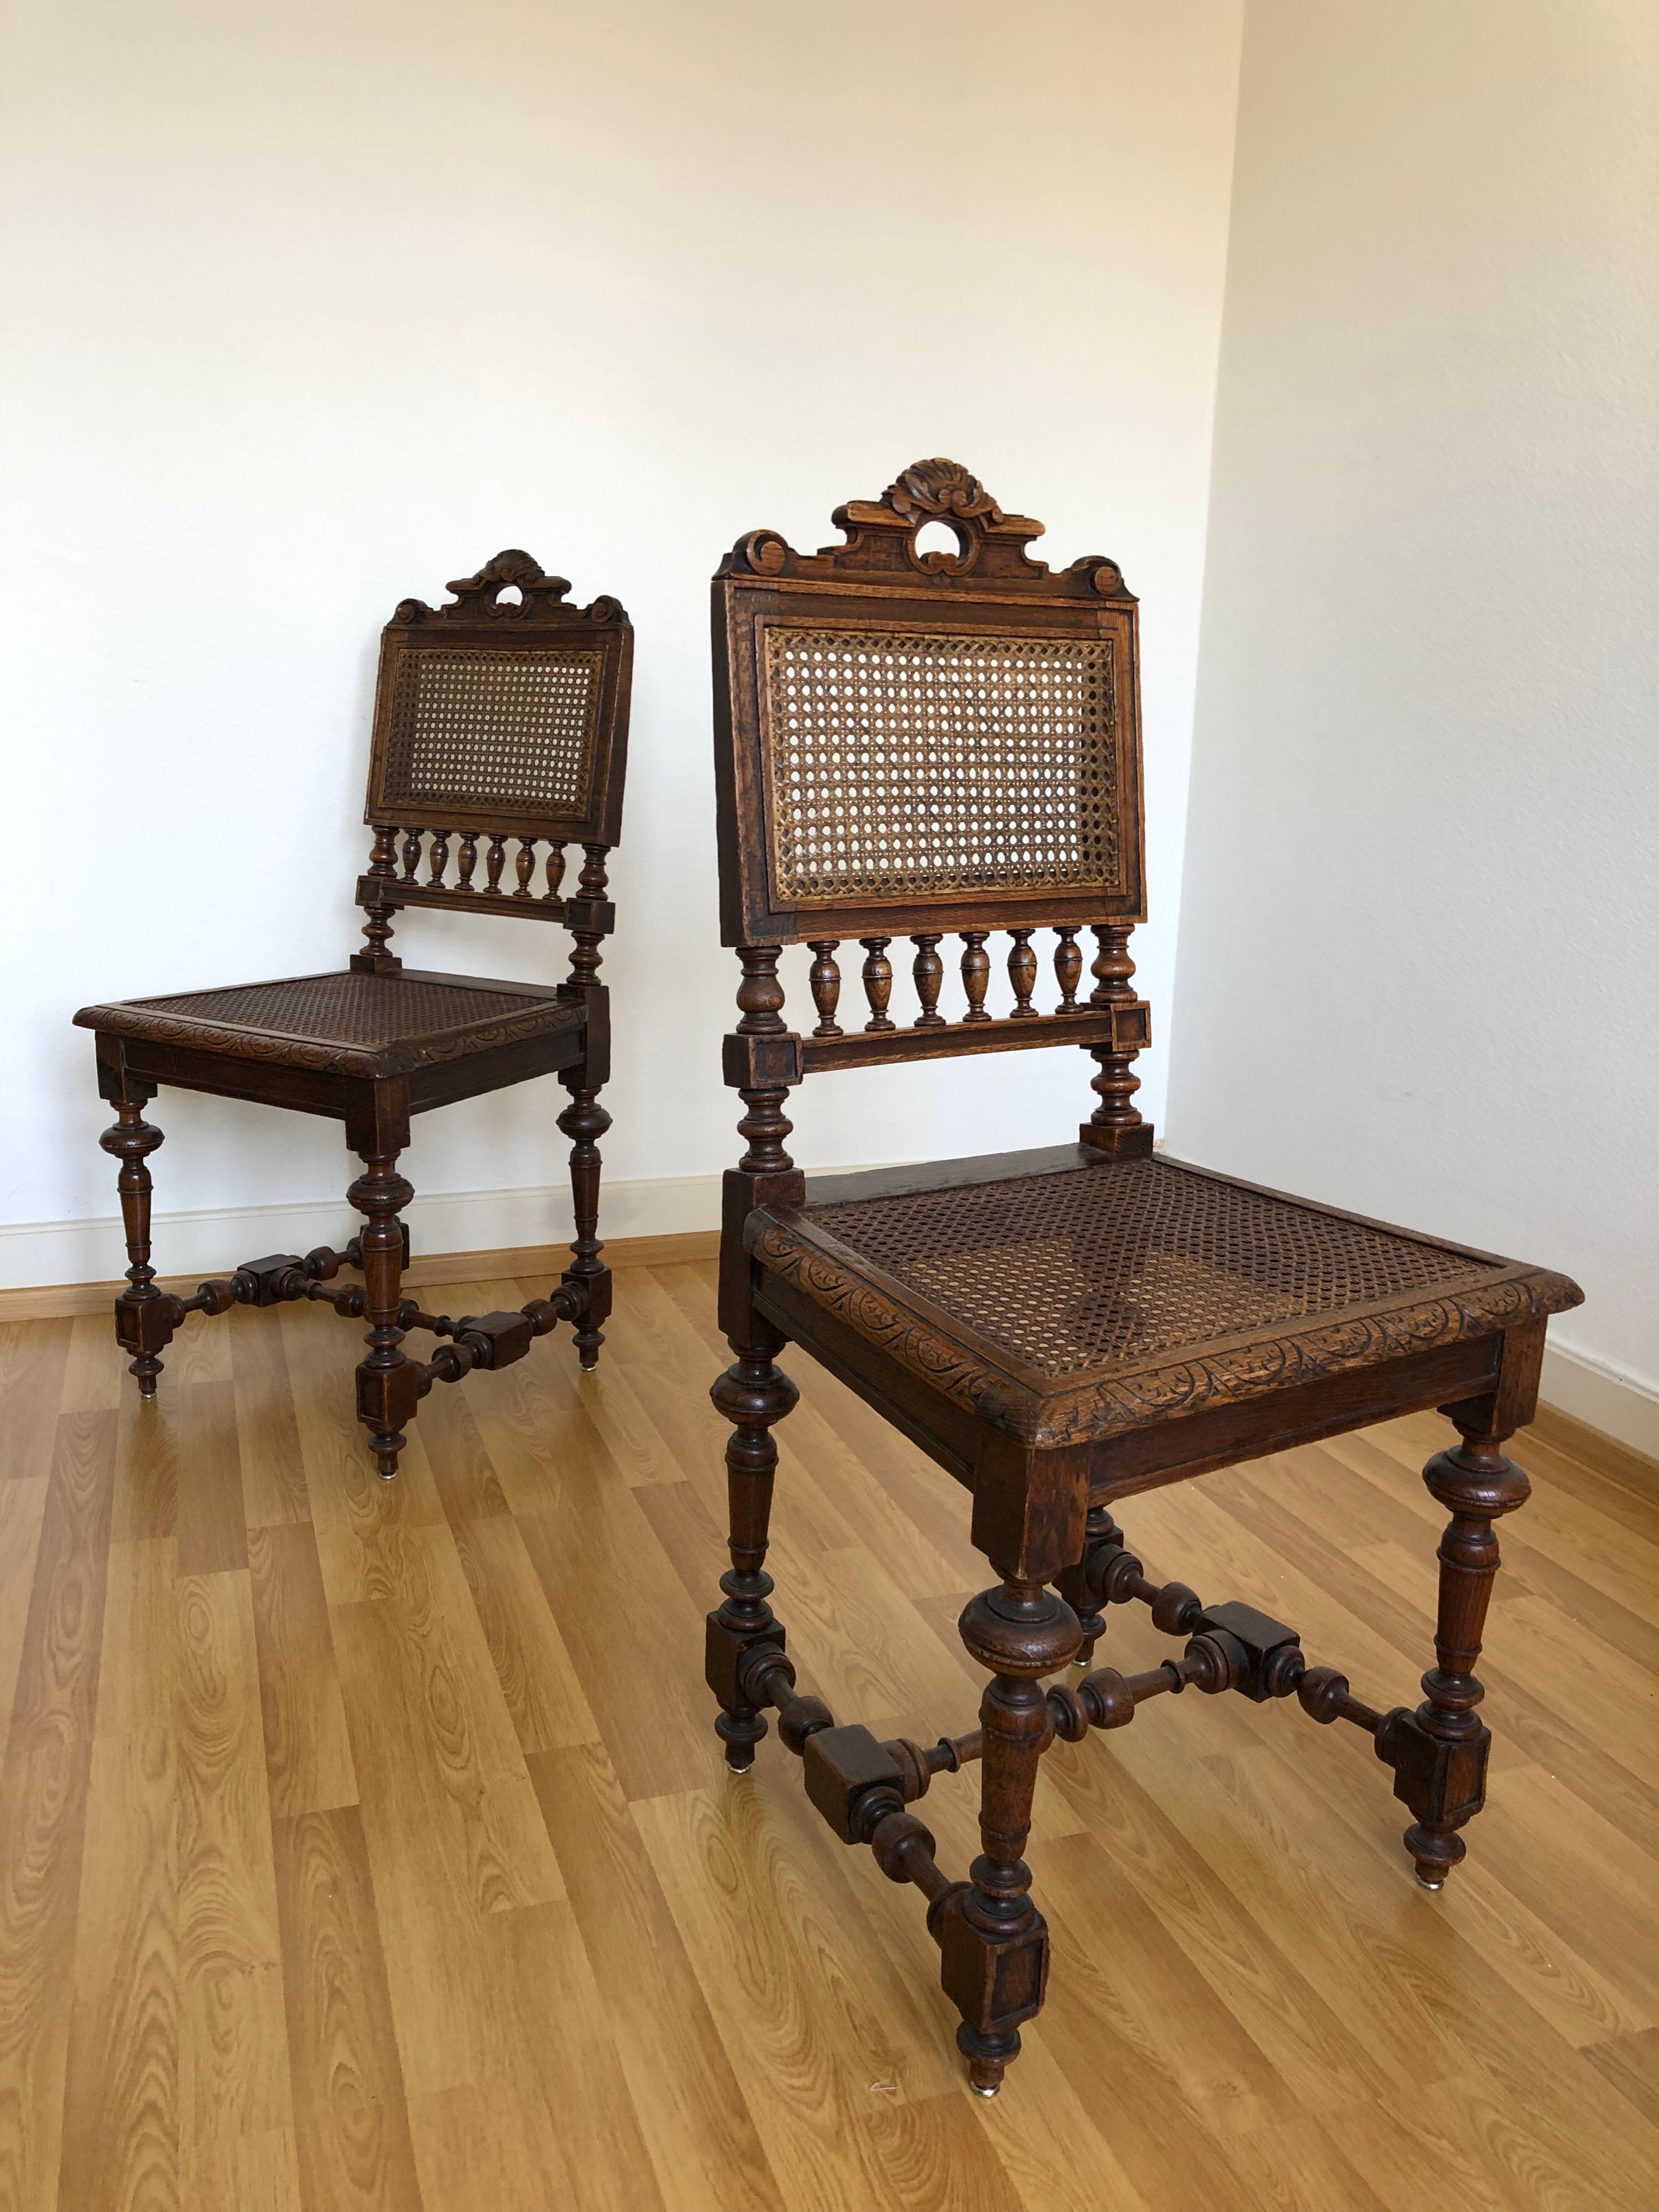 Stunning two antique 19th century Renaissance Revival carved oak barley cane side chairs finely carved barley twist legs, cane seat and backrest.
Complimentary Shipping Worldwide 
 